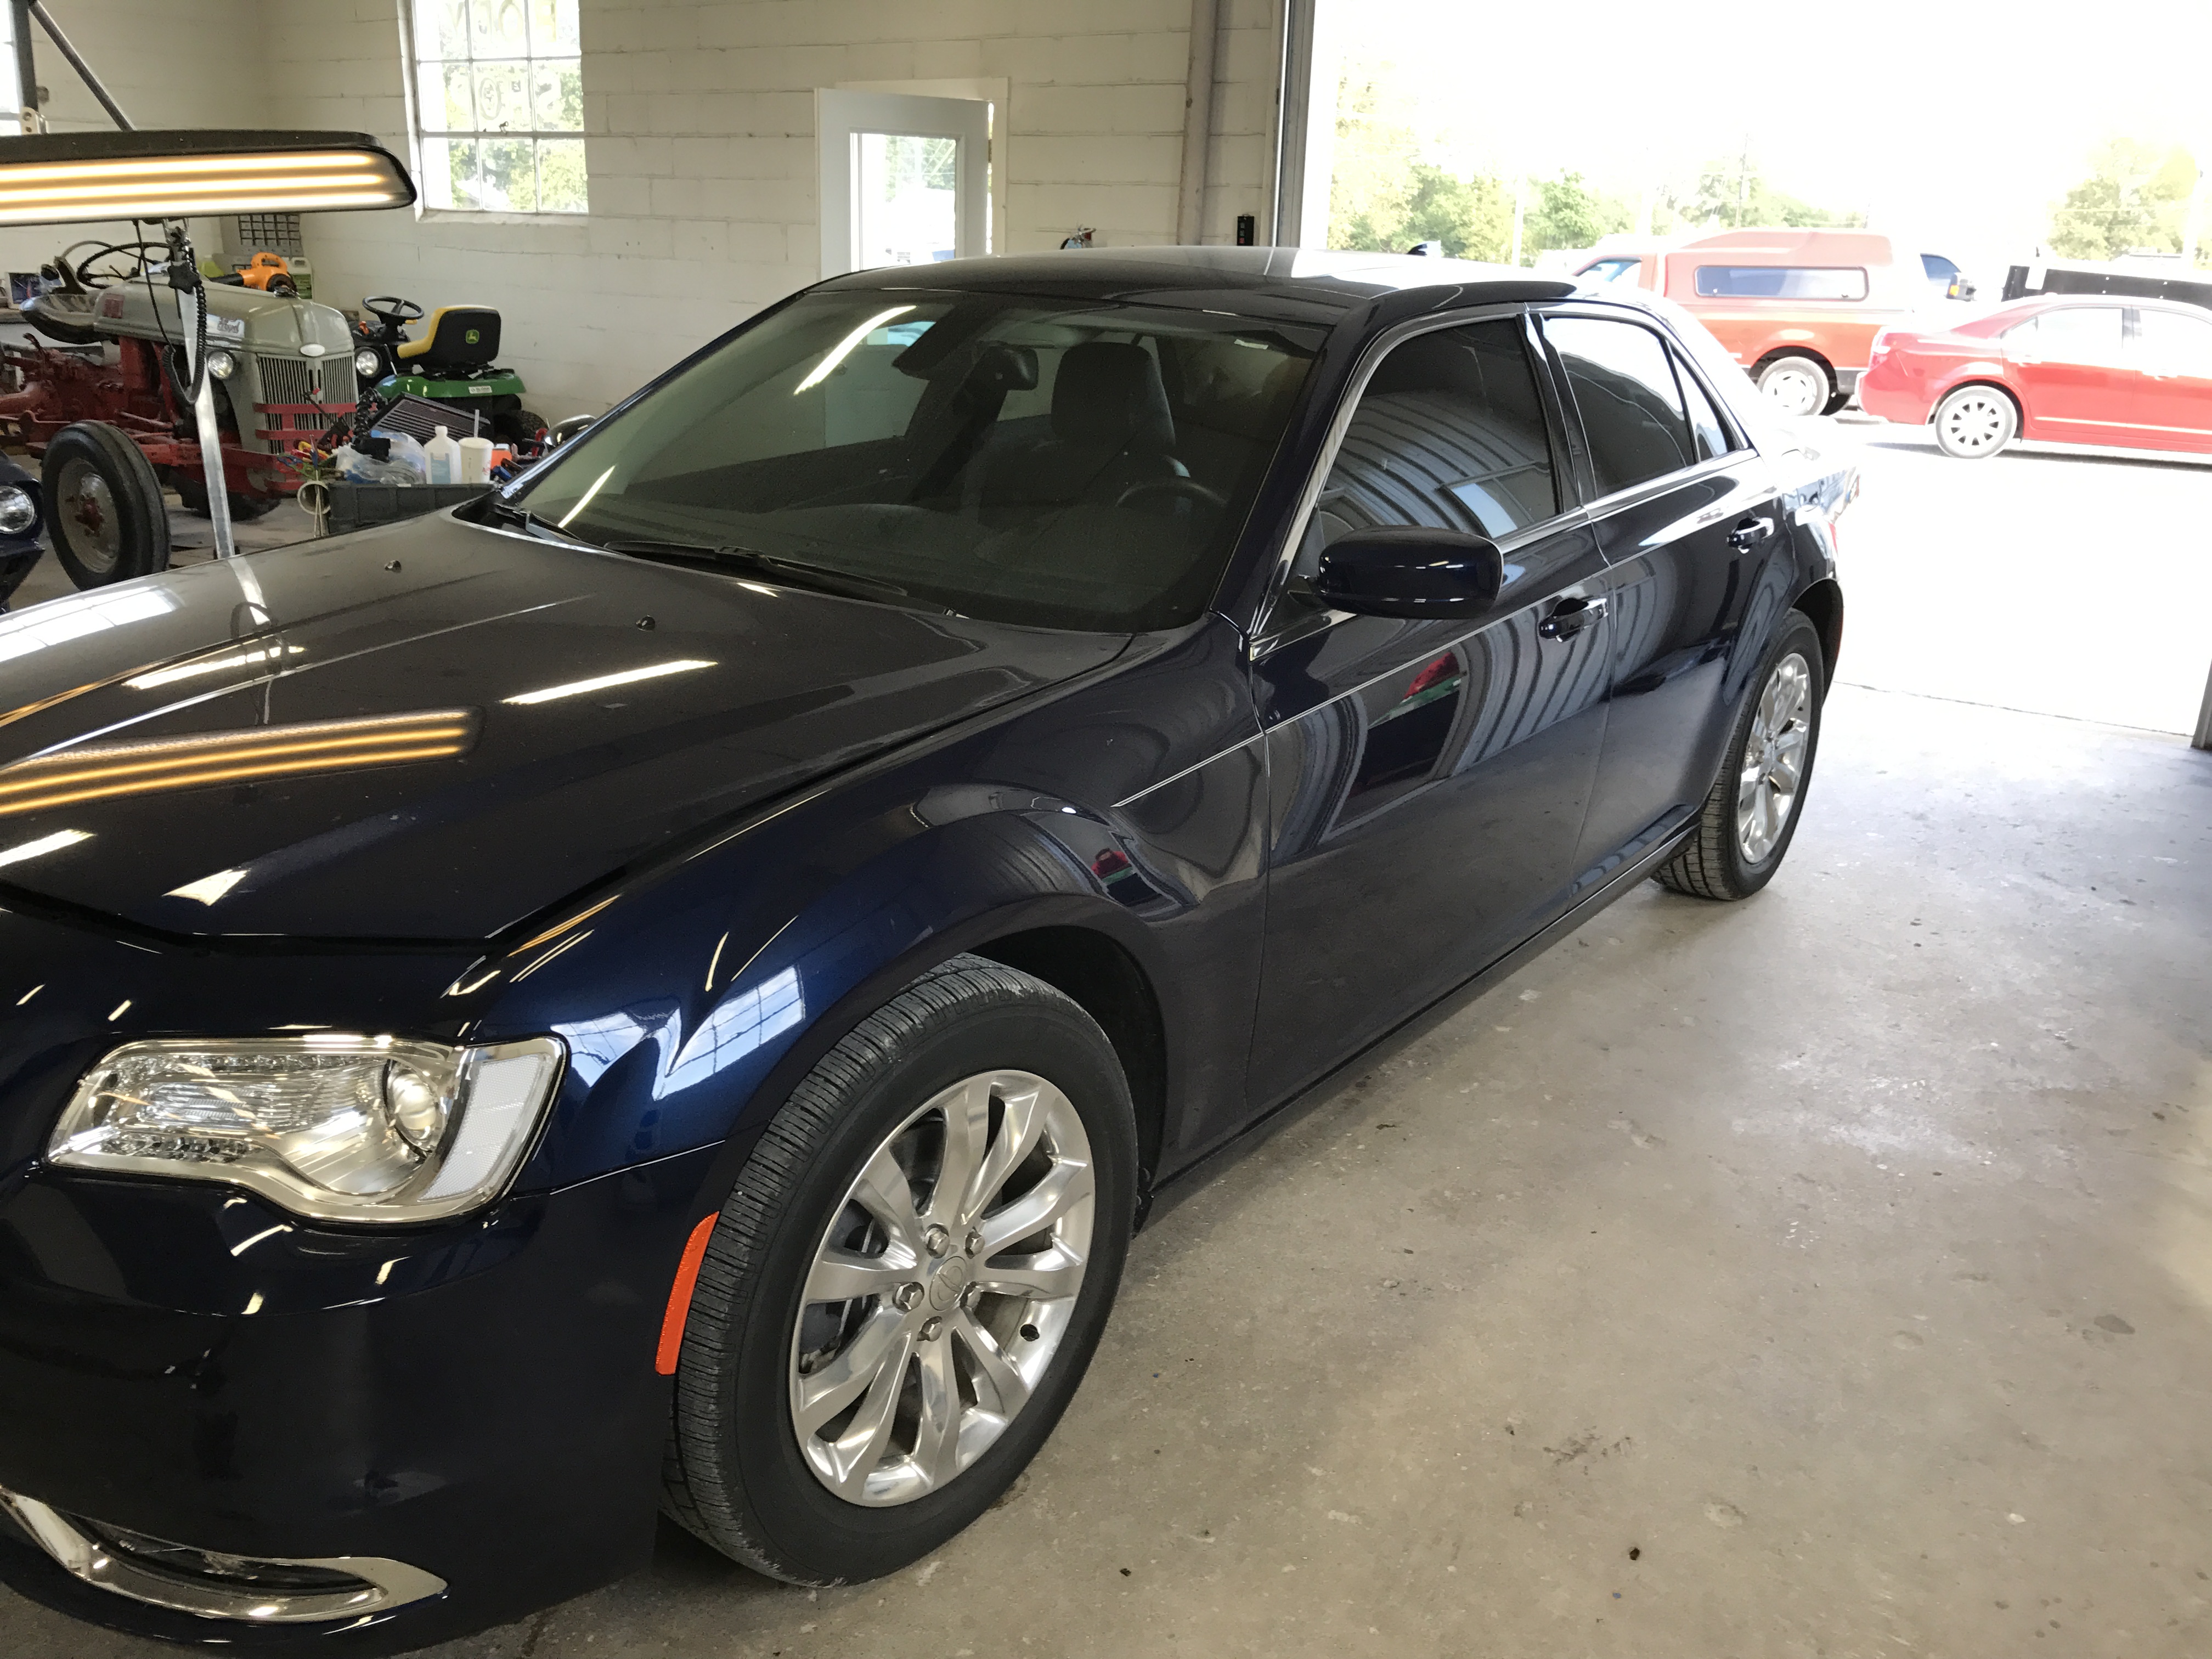 2016 Chrysler 300 Paintless Dent Removal, Springfield, IL. Dent Repair mobile dent removal, http://217dent.com